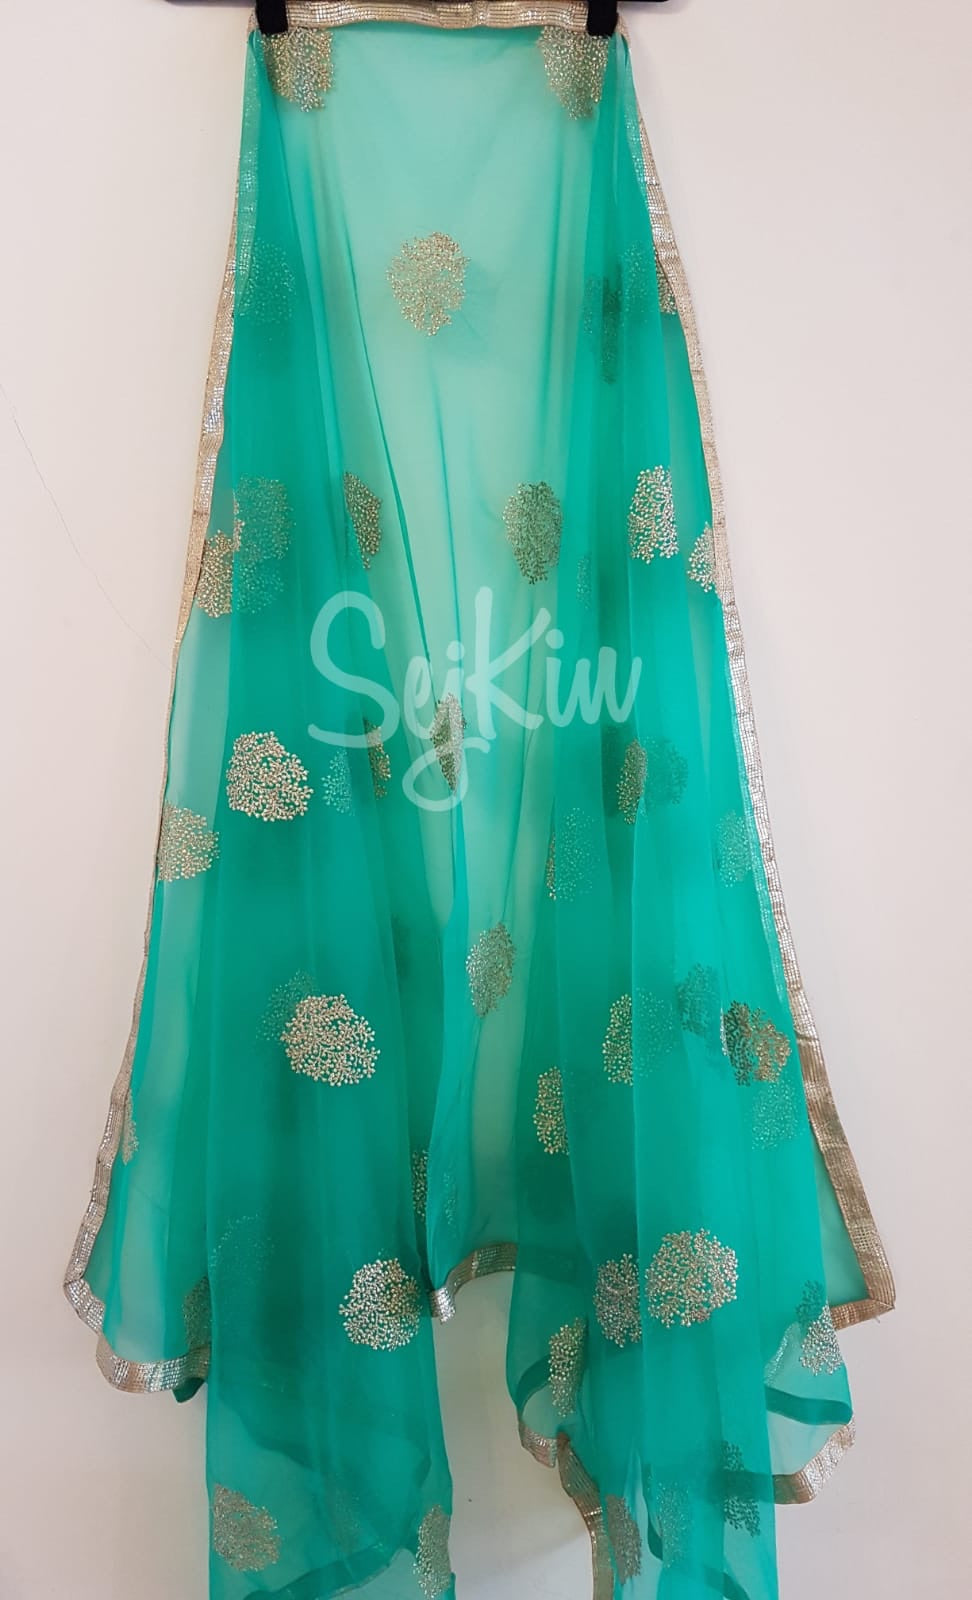 Green with gold embellished net dupatta